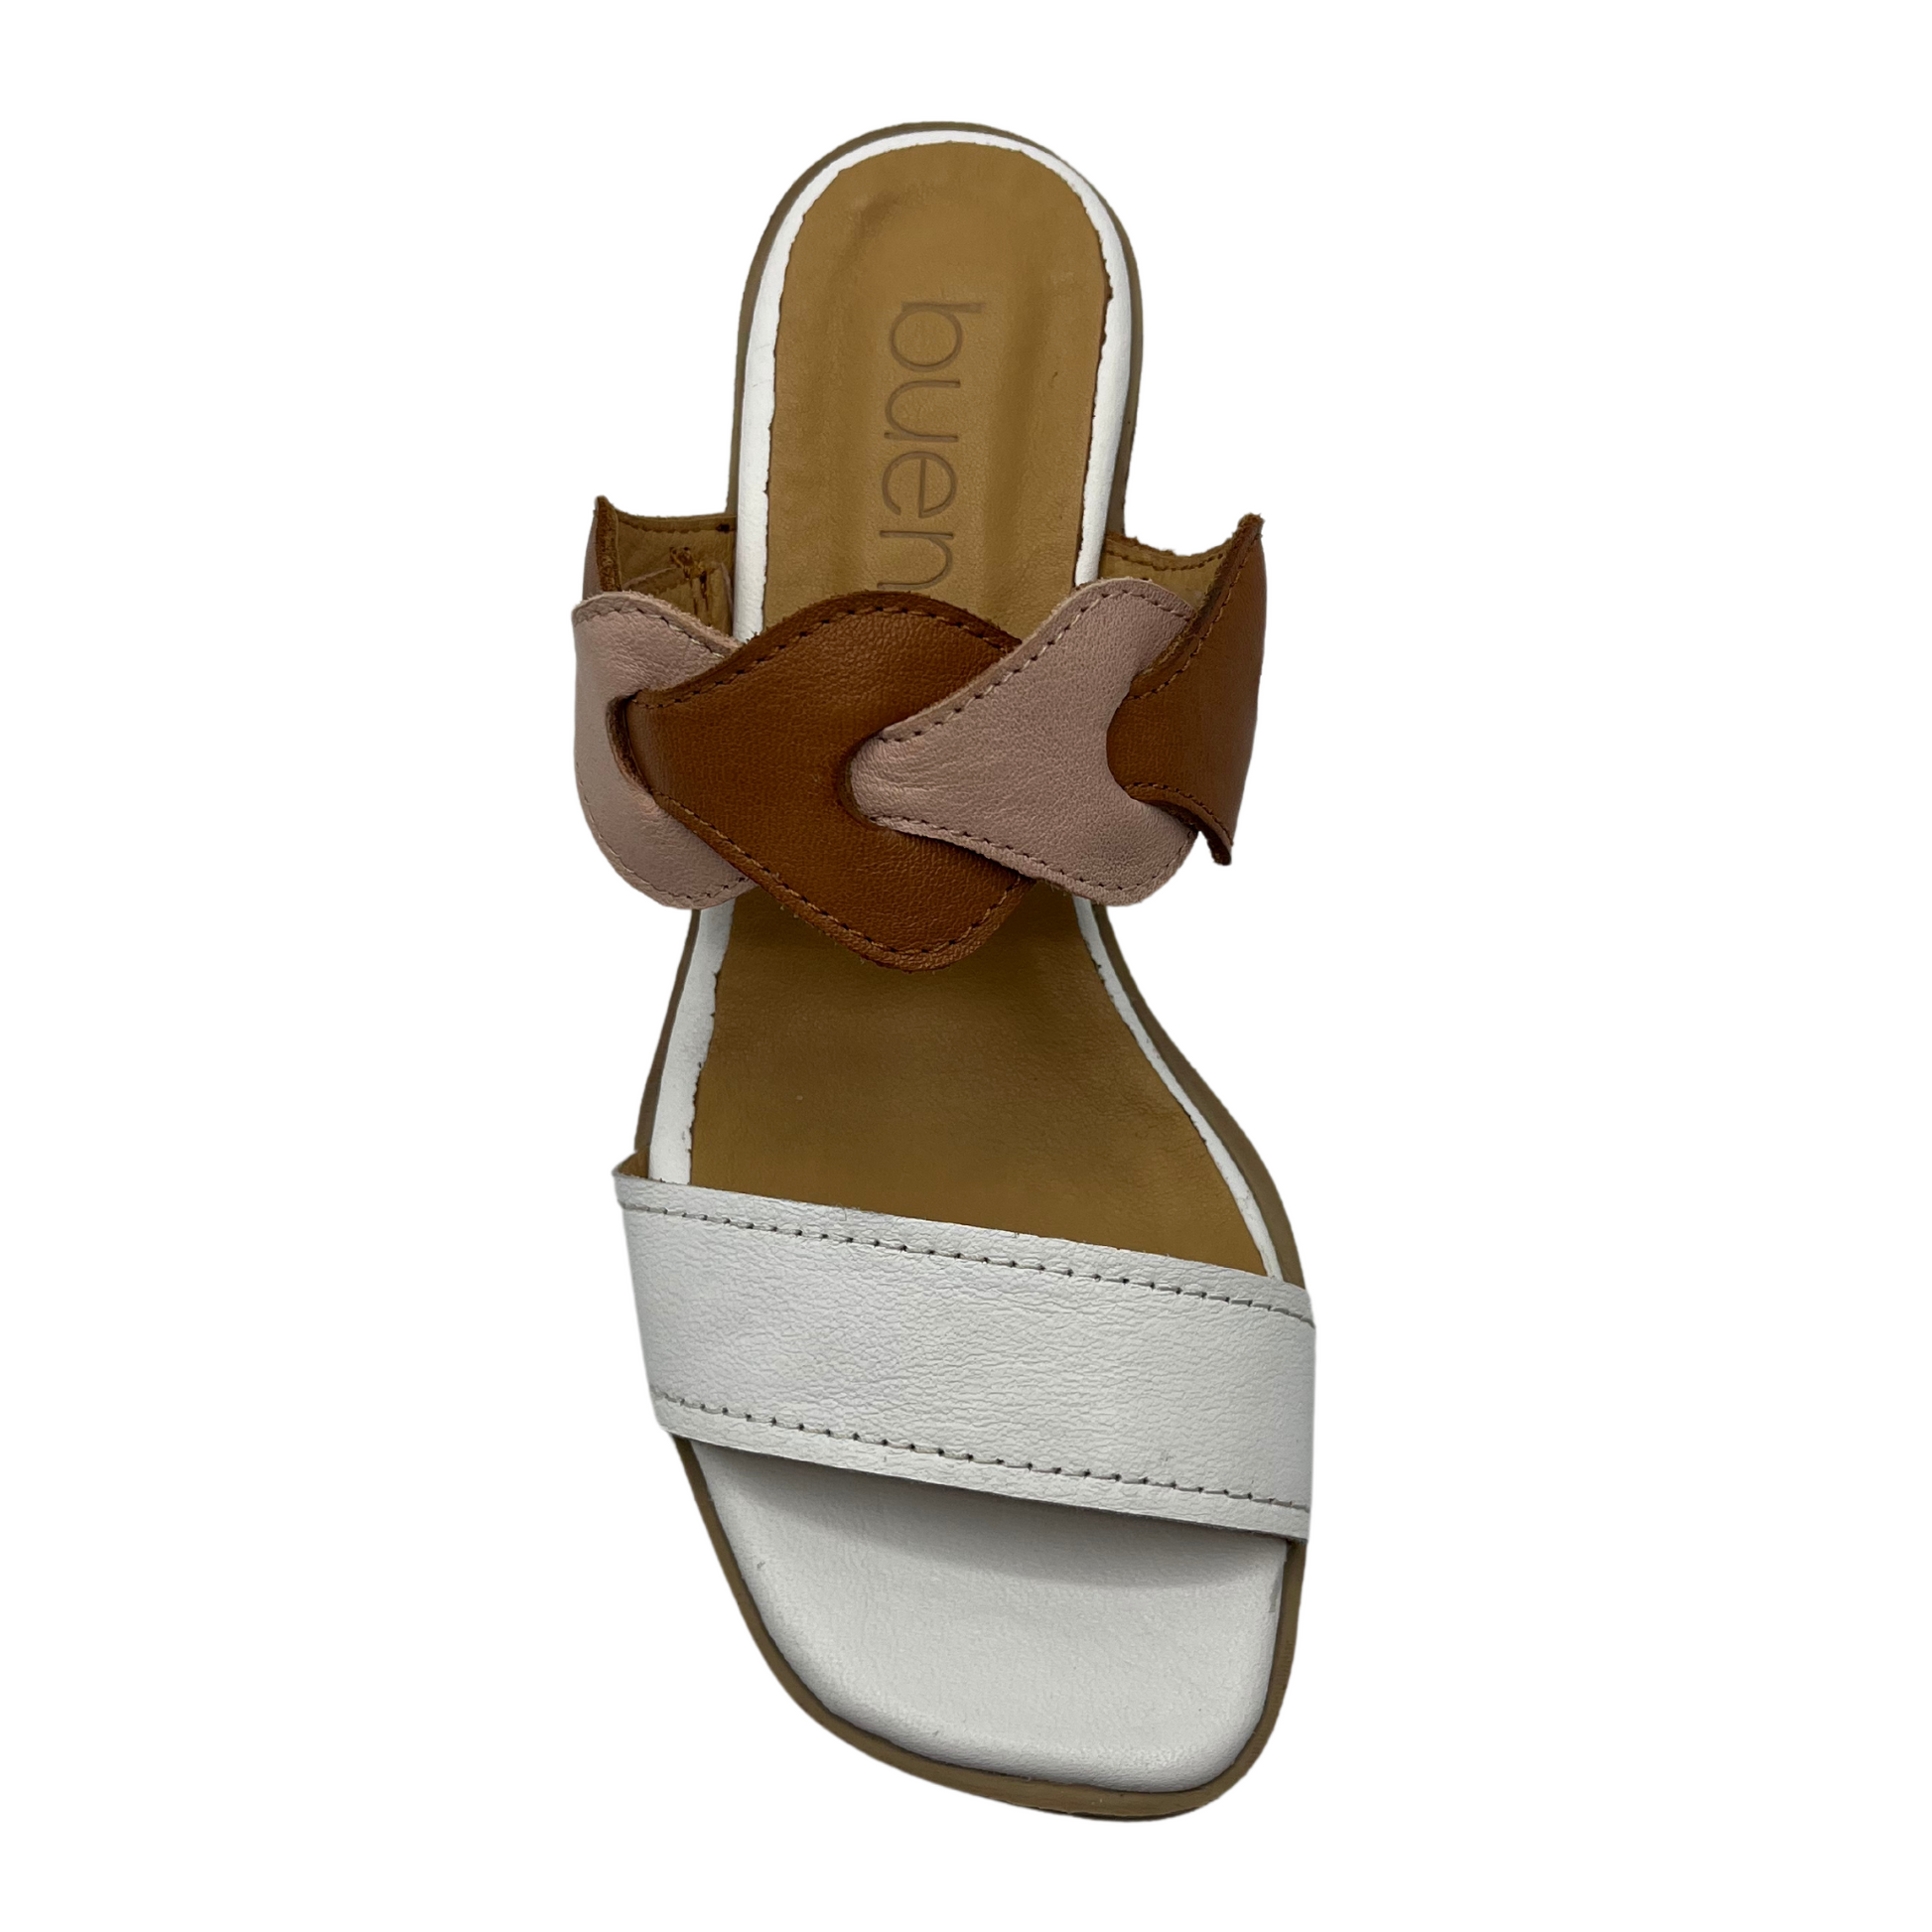 Top view of leather sandal with square toe, white toe strap and brown upper strap and short block heel